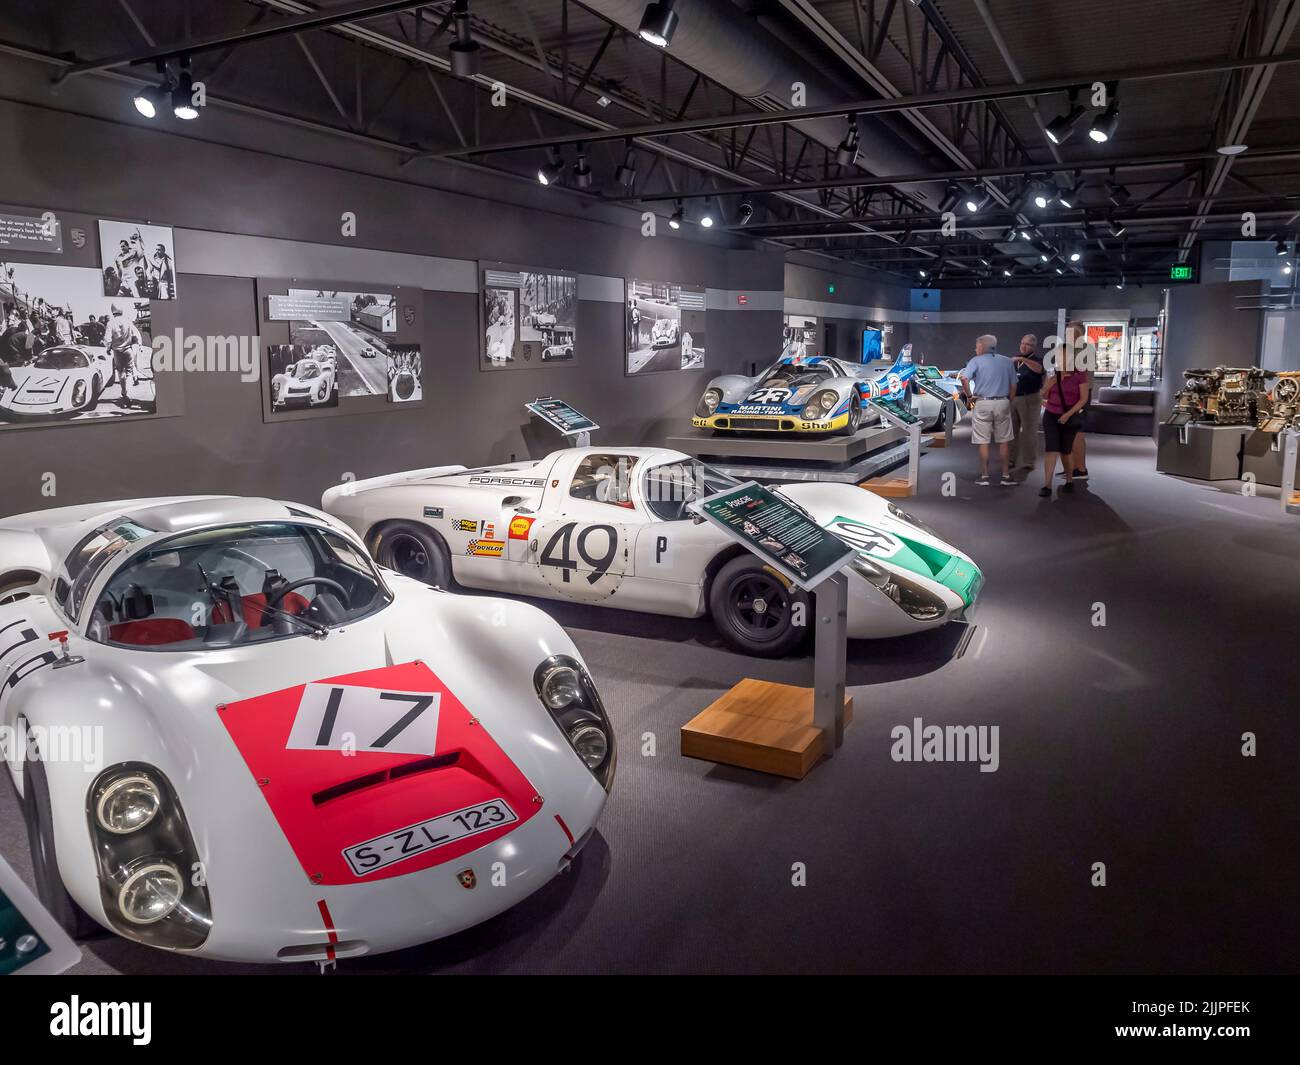 Part of the collection of historic automobiles in the Revs Institute in Naples Florida USA Stock Photo